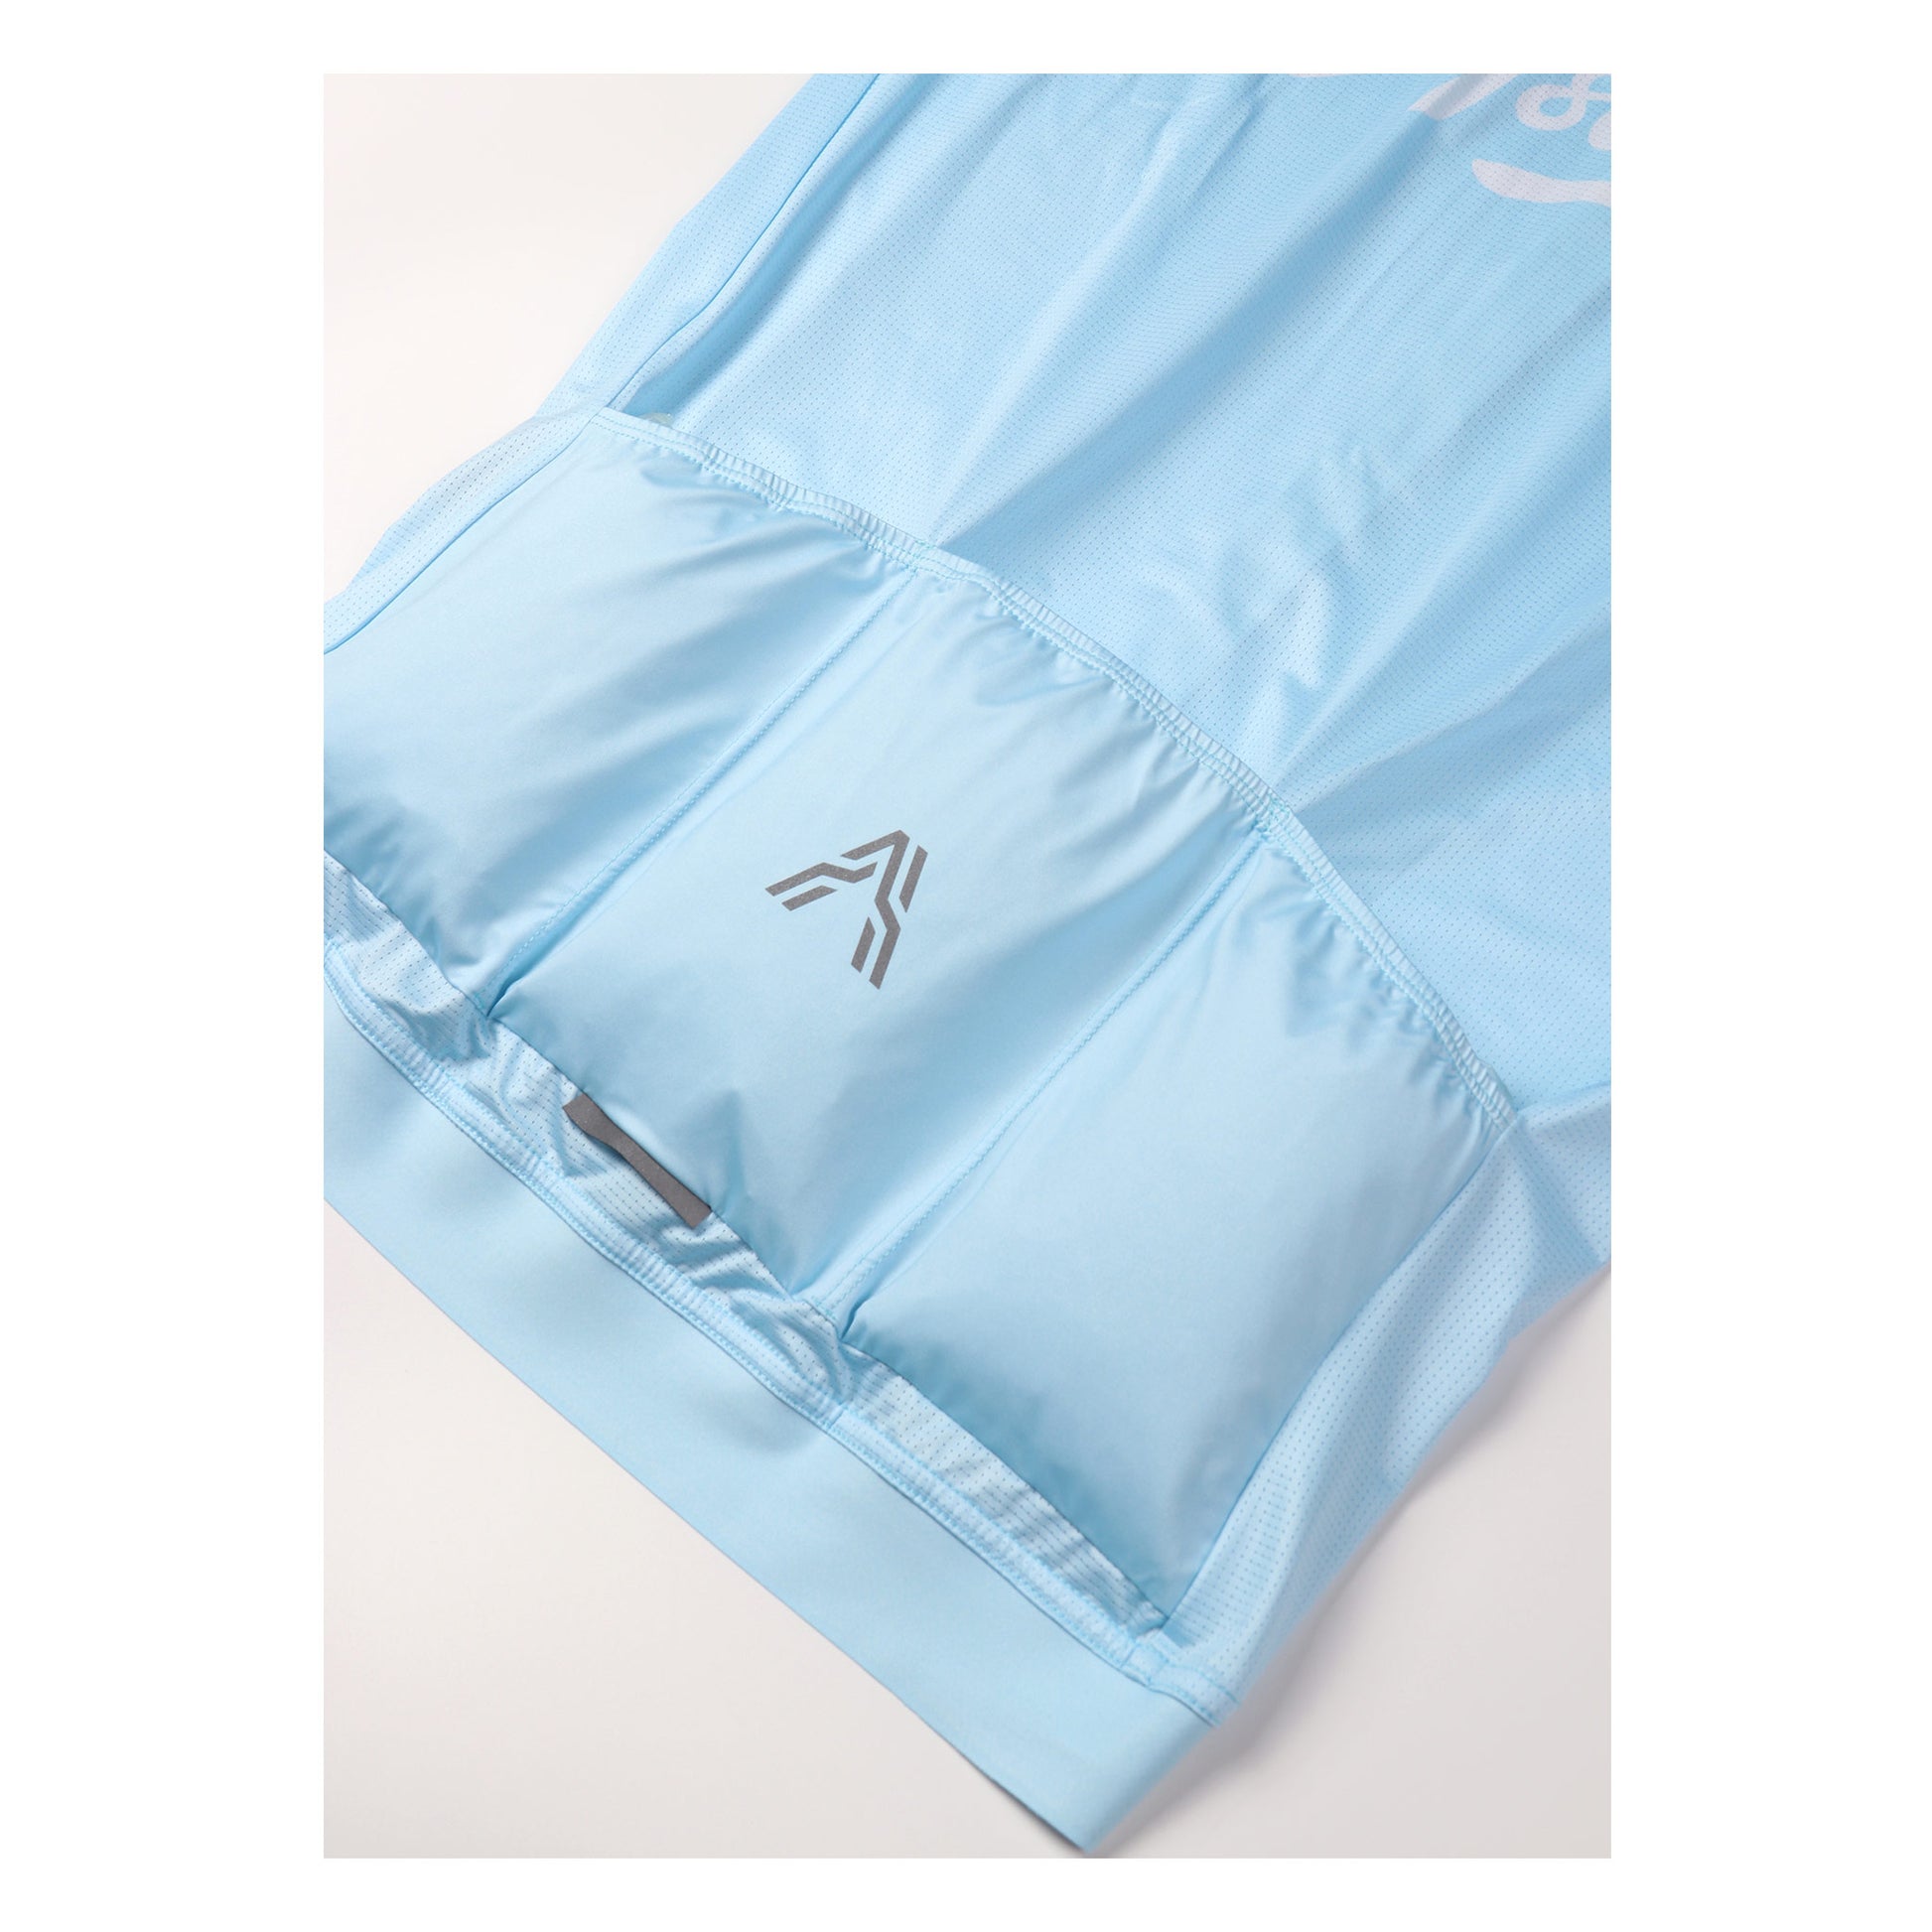 The retro-inspired Astro jersey Sky Blue from Ascender Cycling Club Switzerland Backside View & Back Pockets